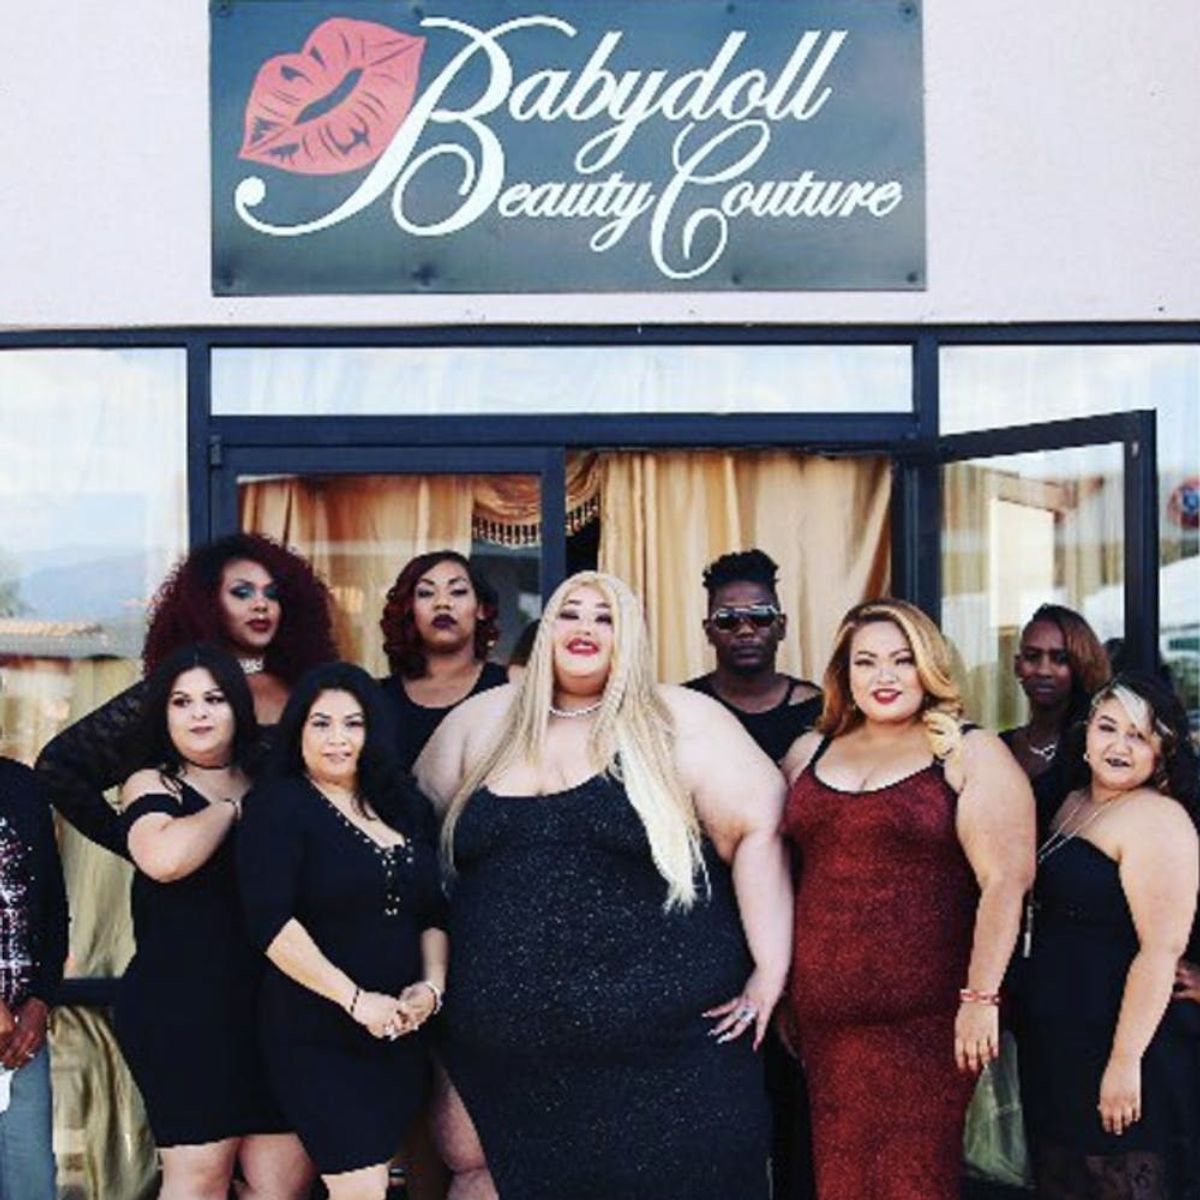 Frustrated by a Fat-Shaming Beauty Industry, This Makeup Artist Launched the World’s First Plus-Size Beauty Salon